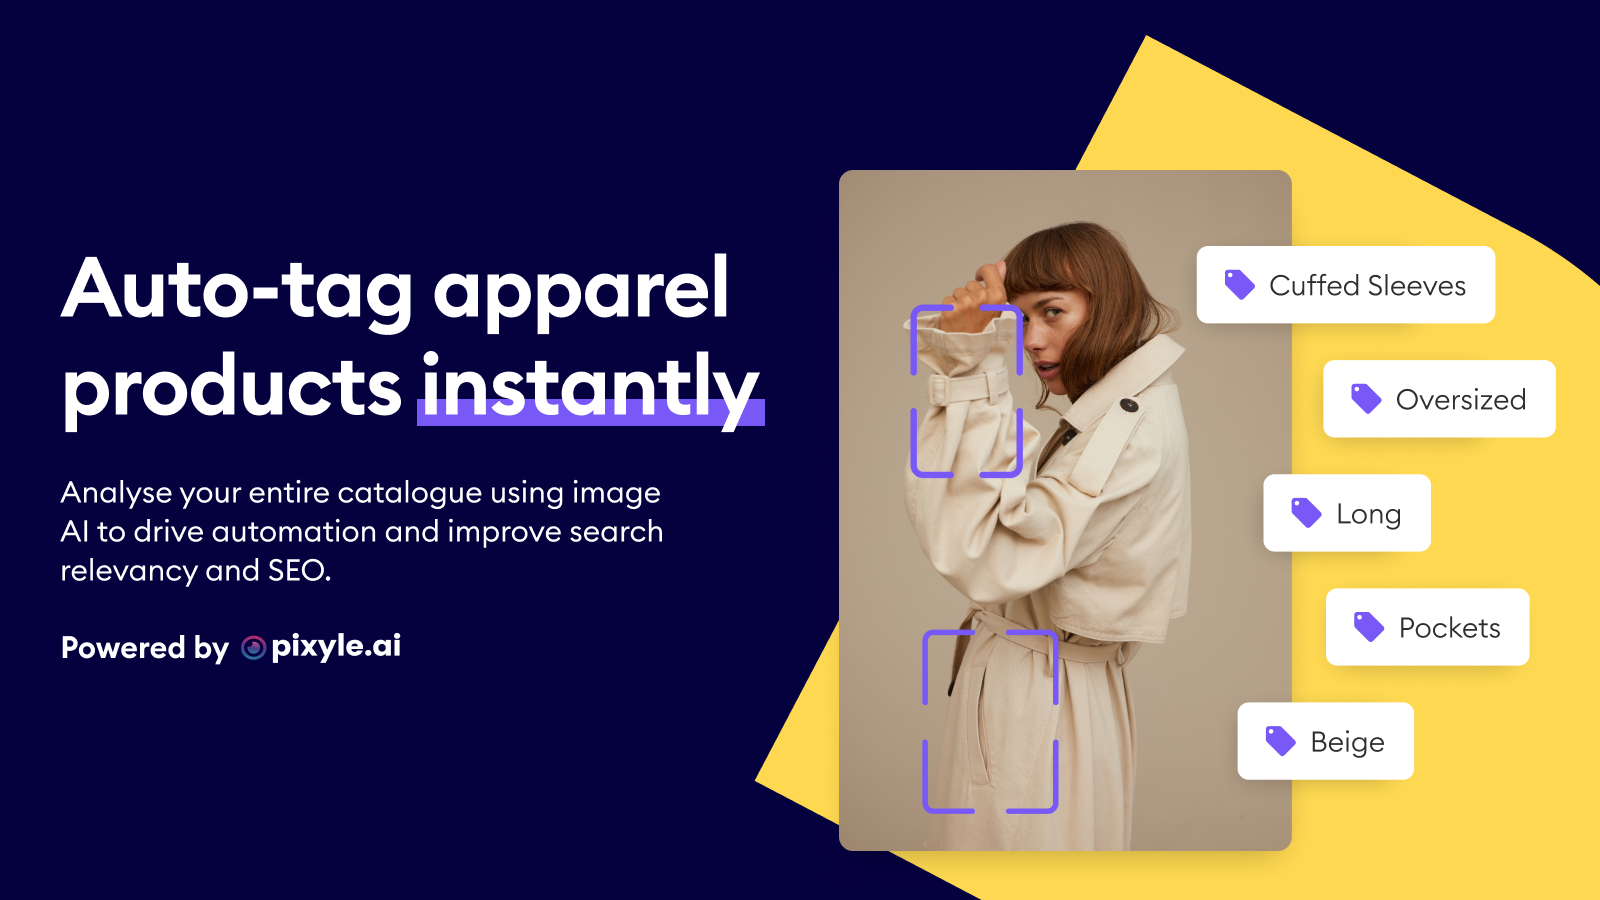 Auto-tag apparel products instantly with Reactify Image AI